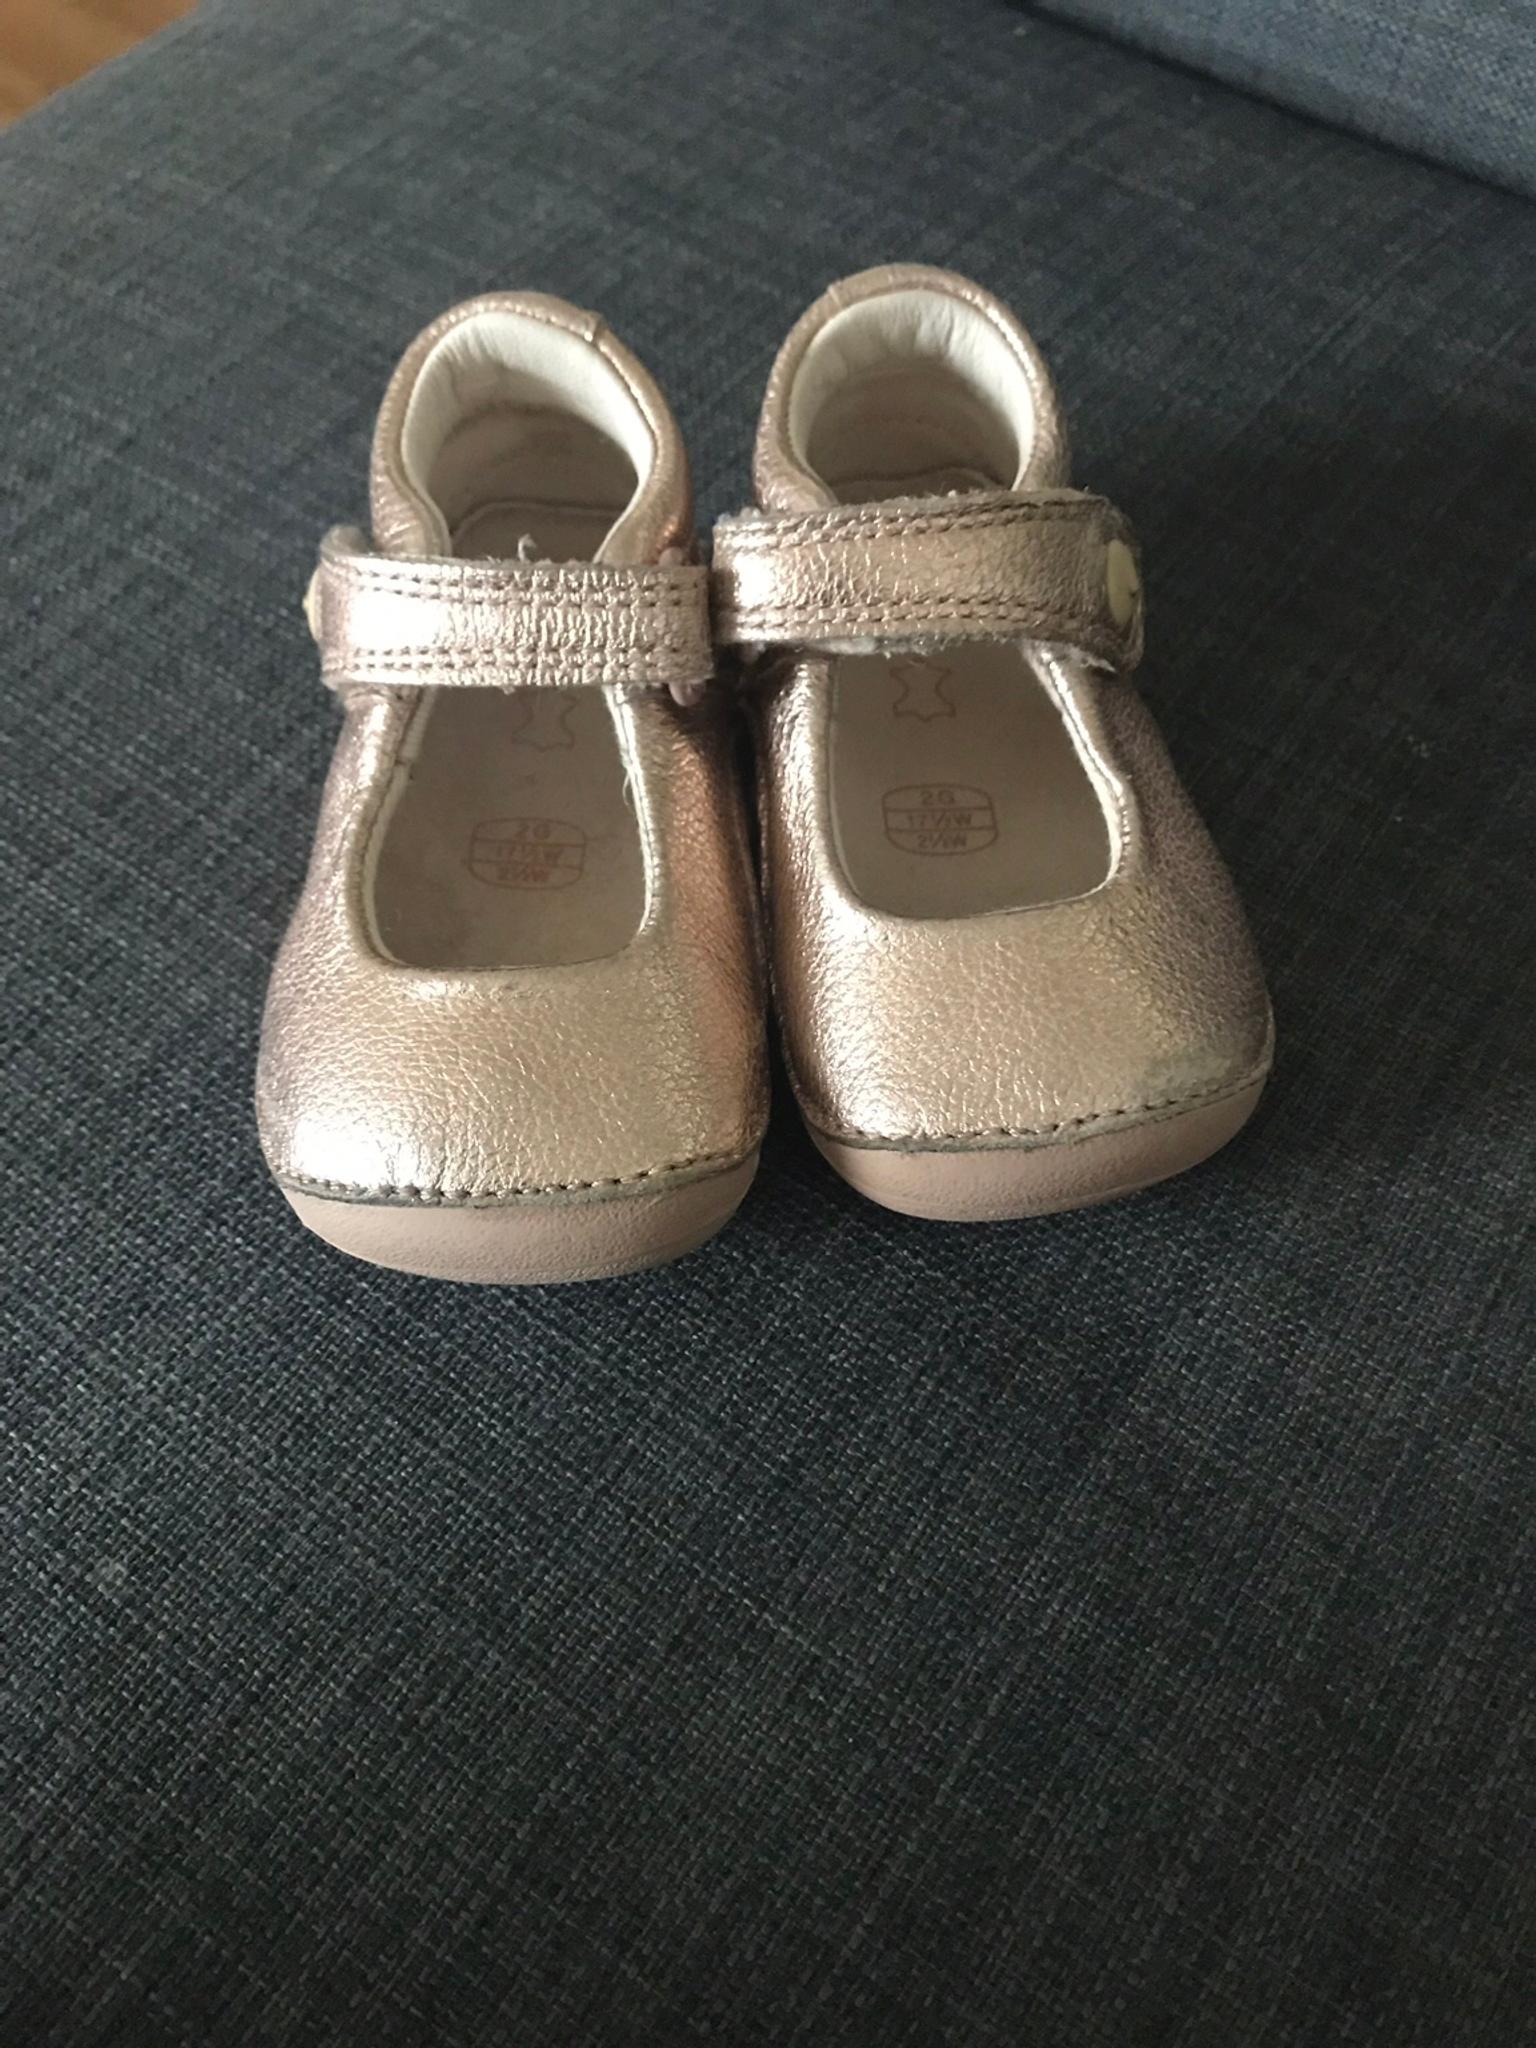 clarks 1st baby shoes